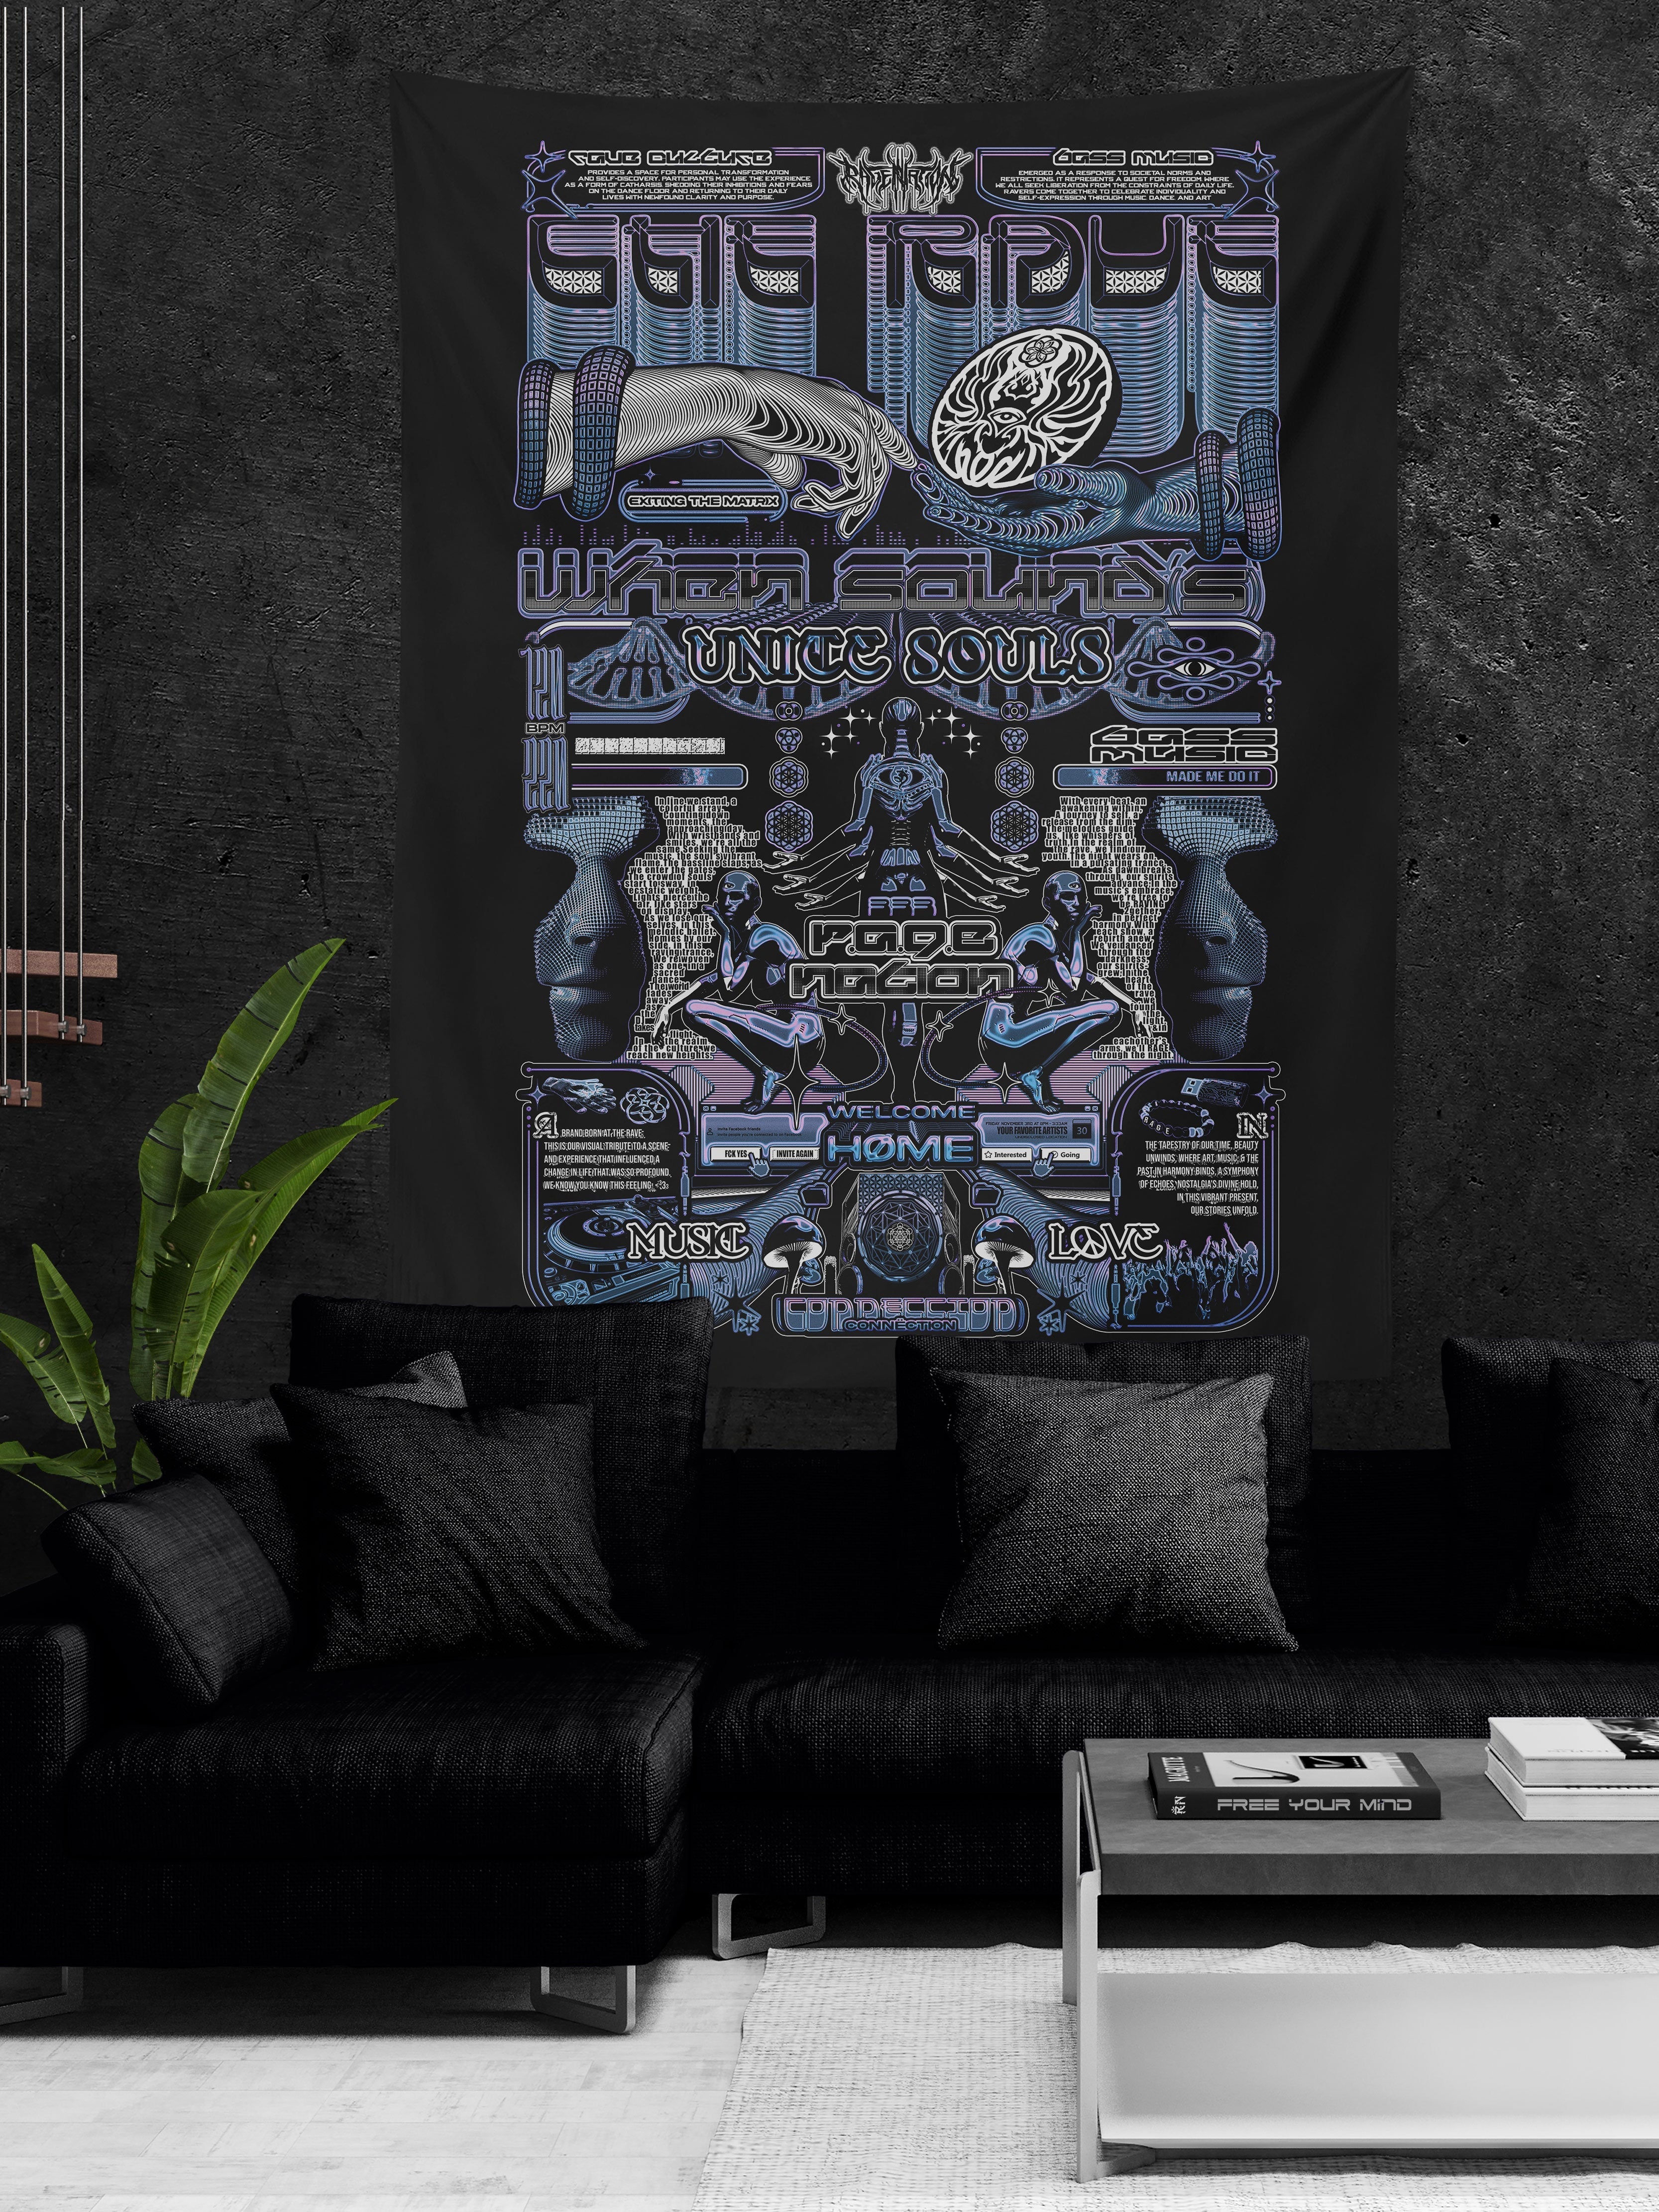 THE RAVE 001 ✦ RAGE NATION ✦ 111 Limited Edition Tapestry Tapestry 